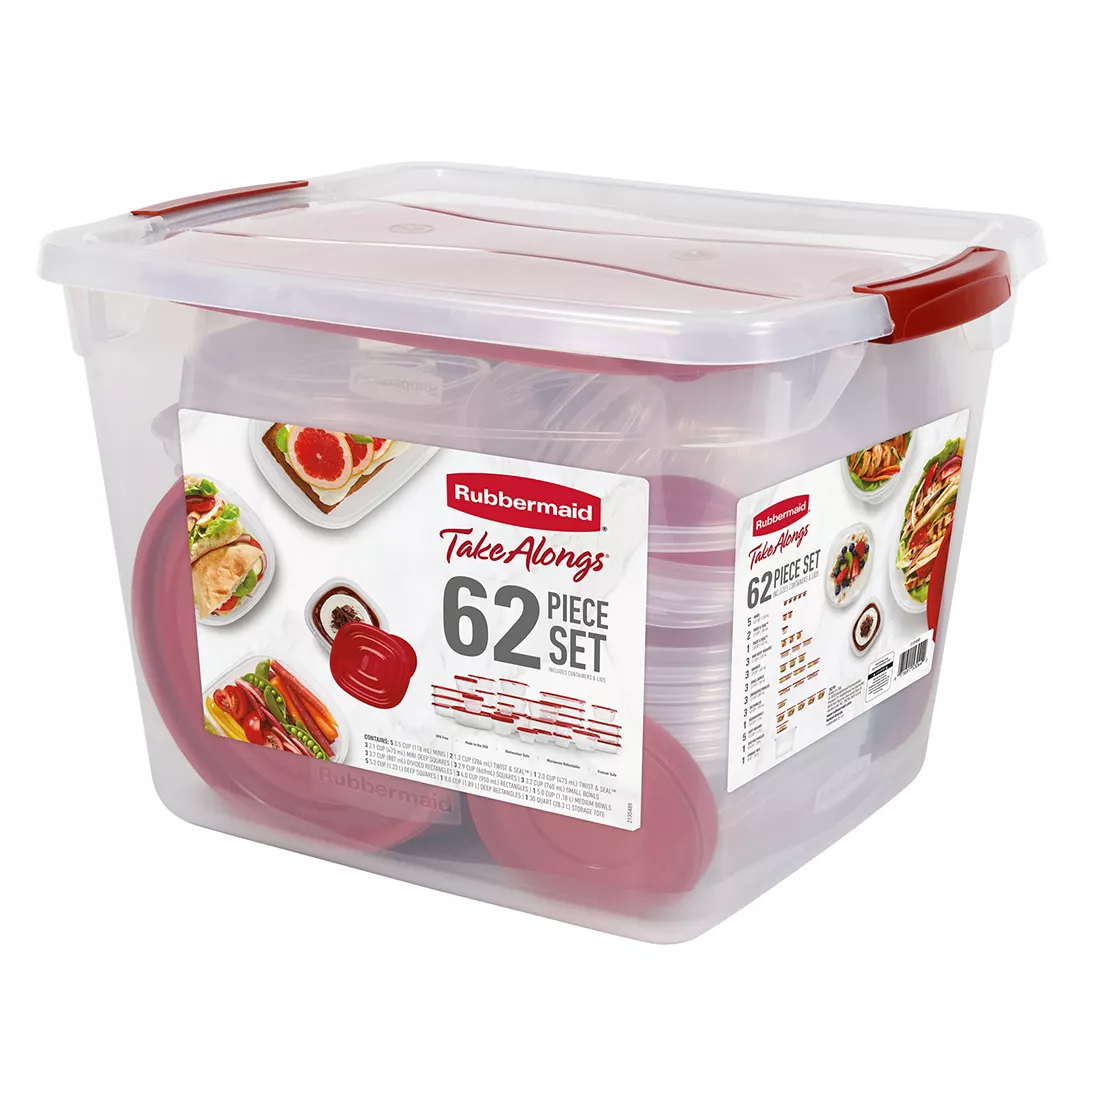 RUBBERMAID TAKEALONGS ROUND 5 CUP CONTAINERS 3 PC